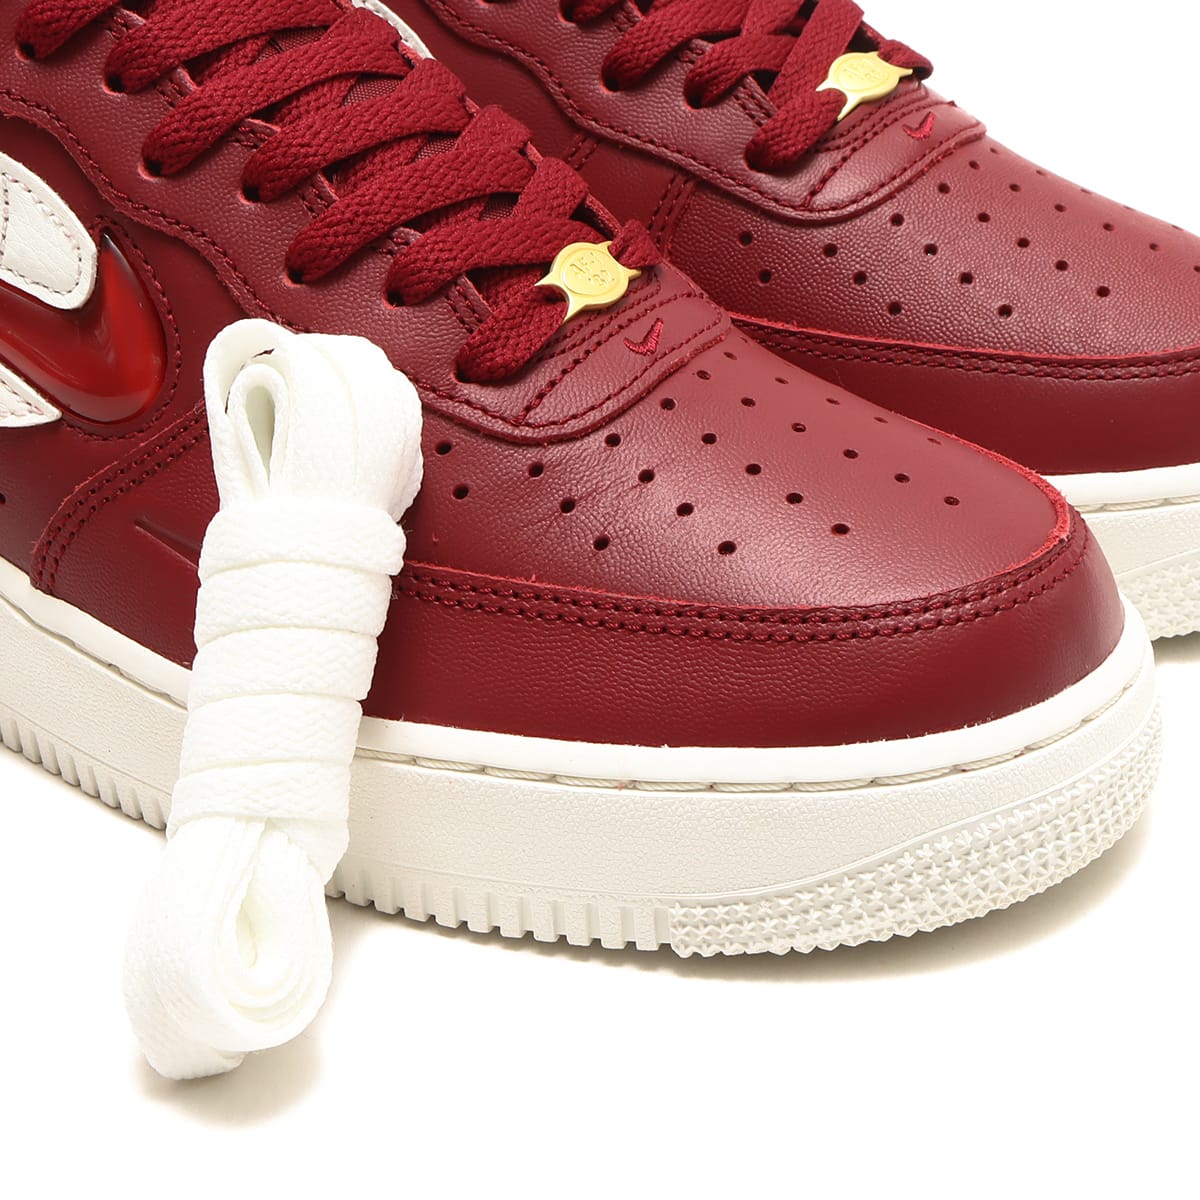 NIKE AIR FORCE 1 07 LE/RED 26.0cm